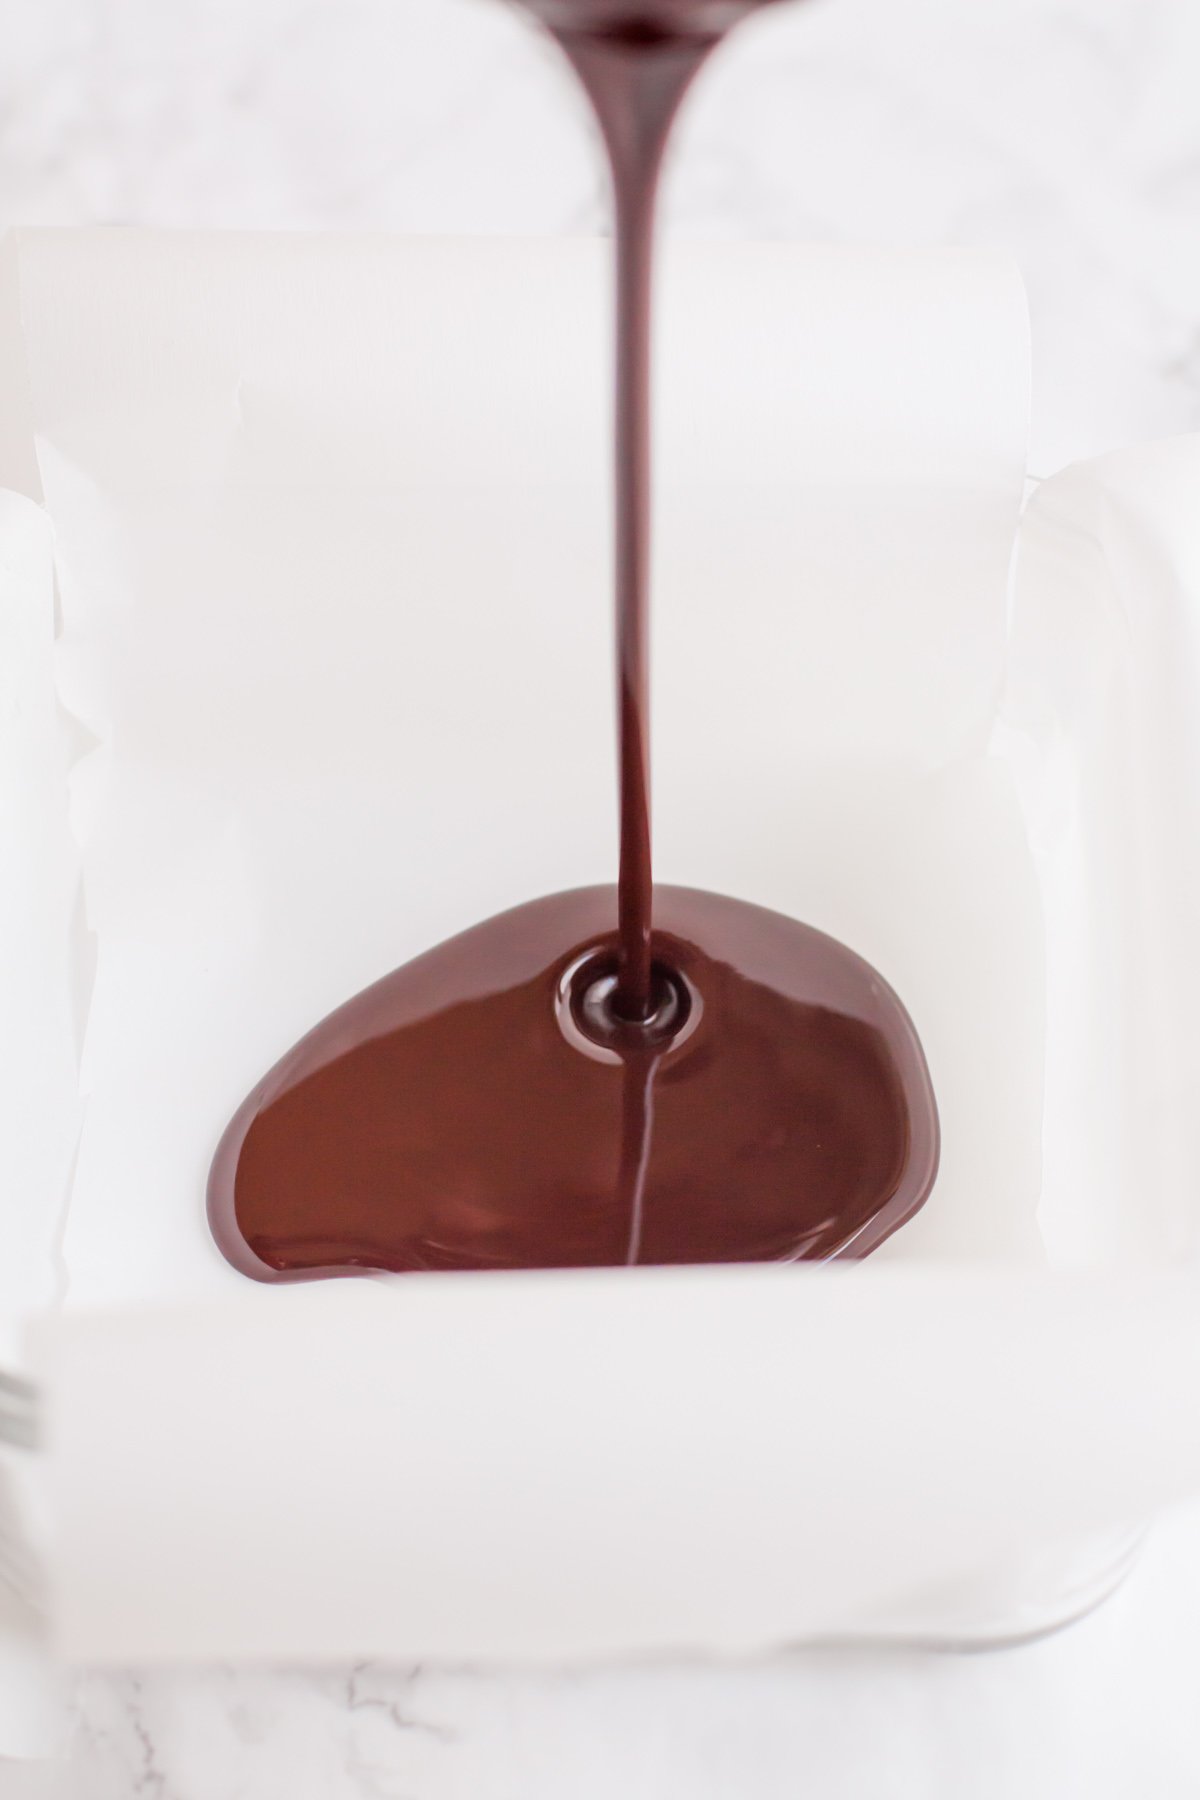 Melted coconut oil and cocoa powder being poured into a parchment paper-lined pan.